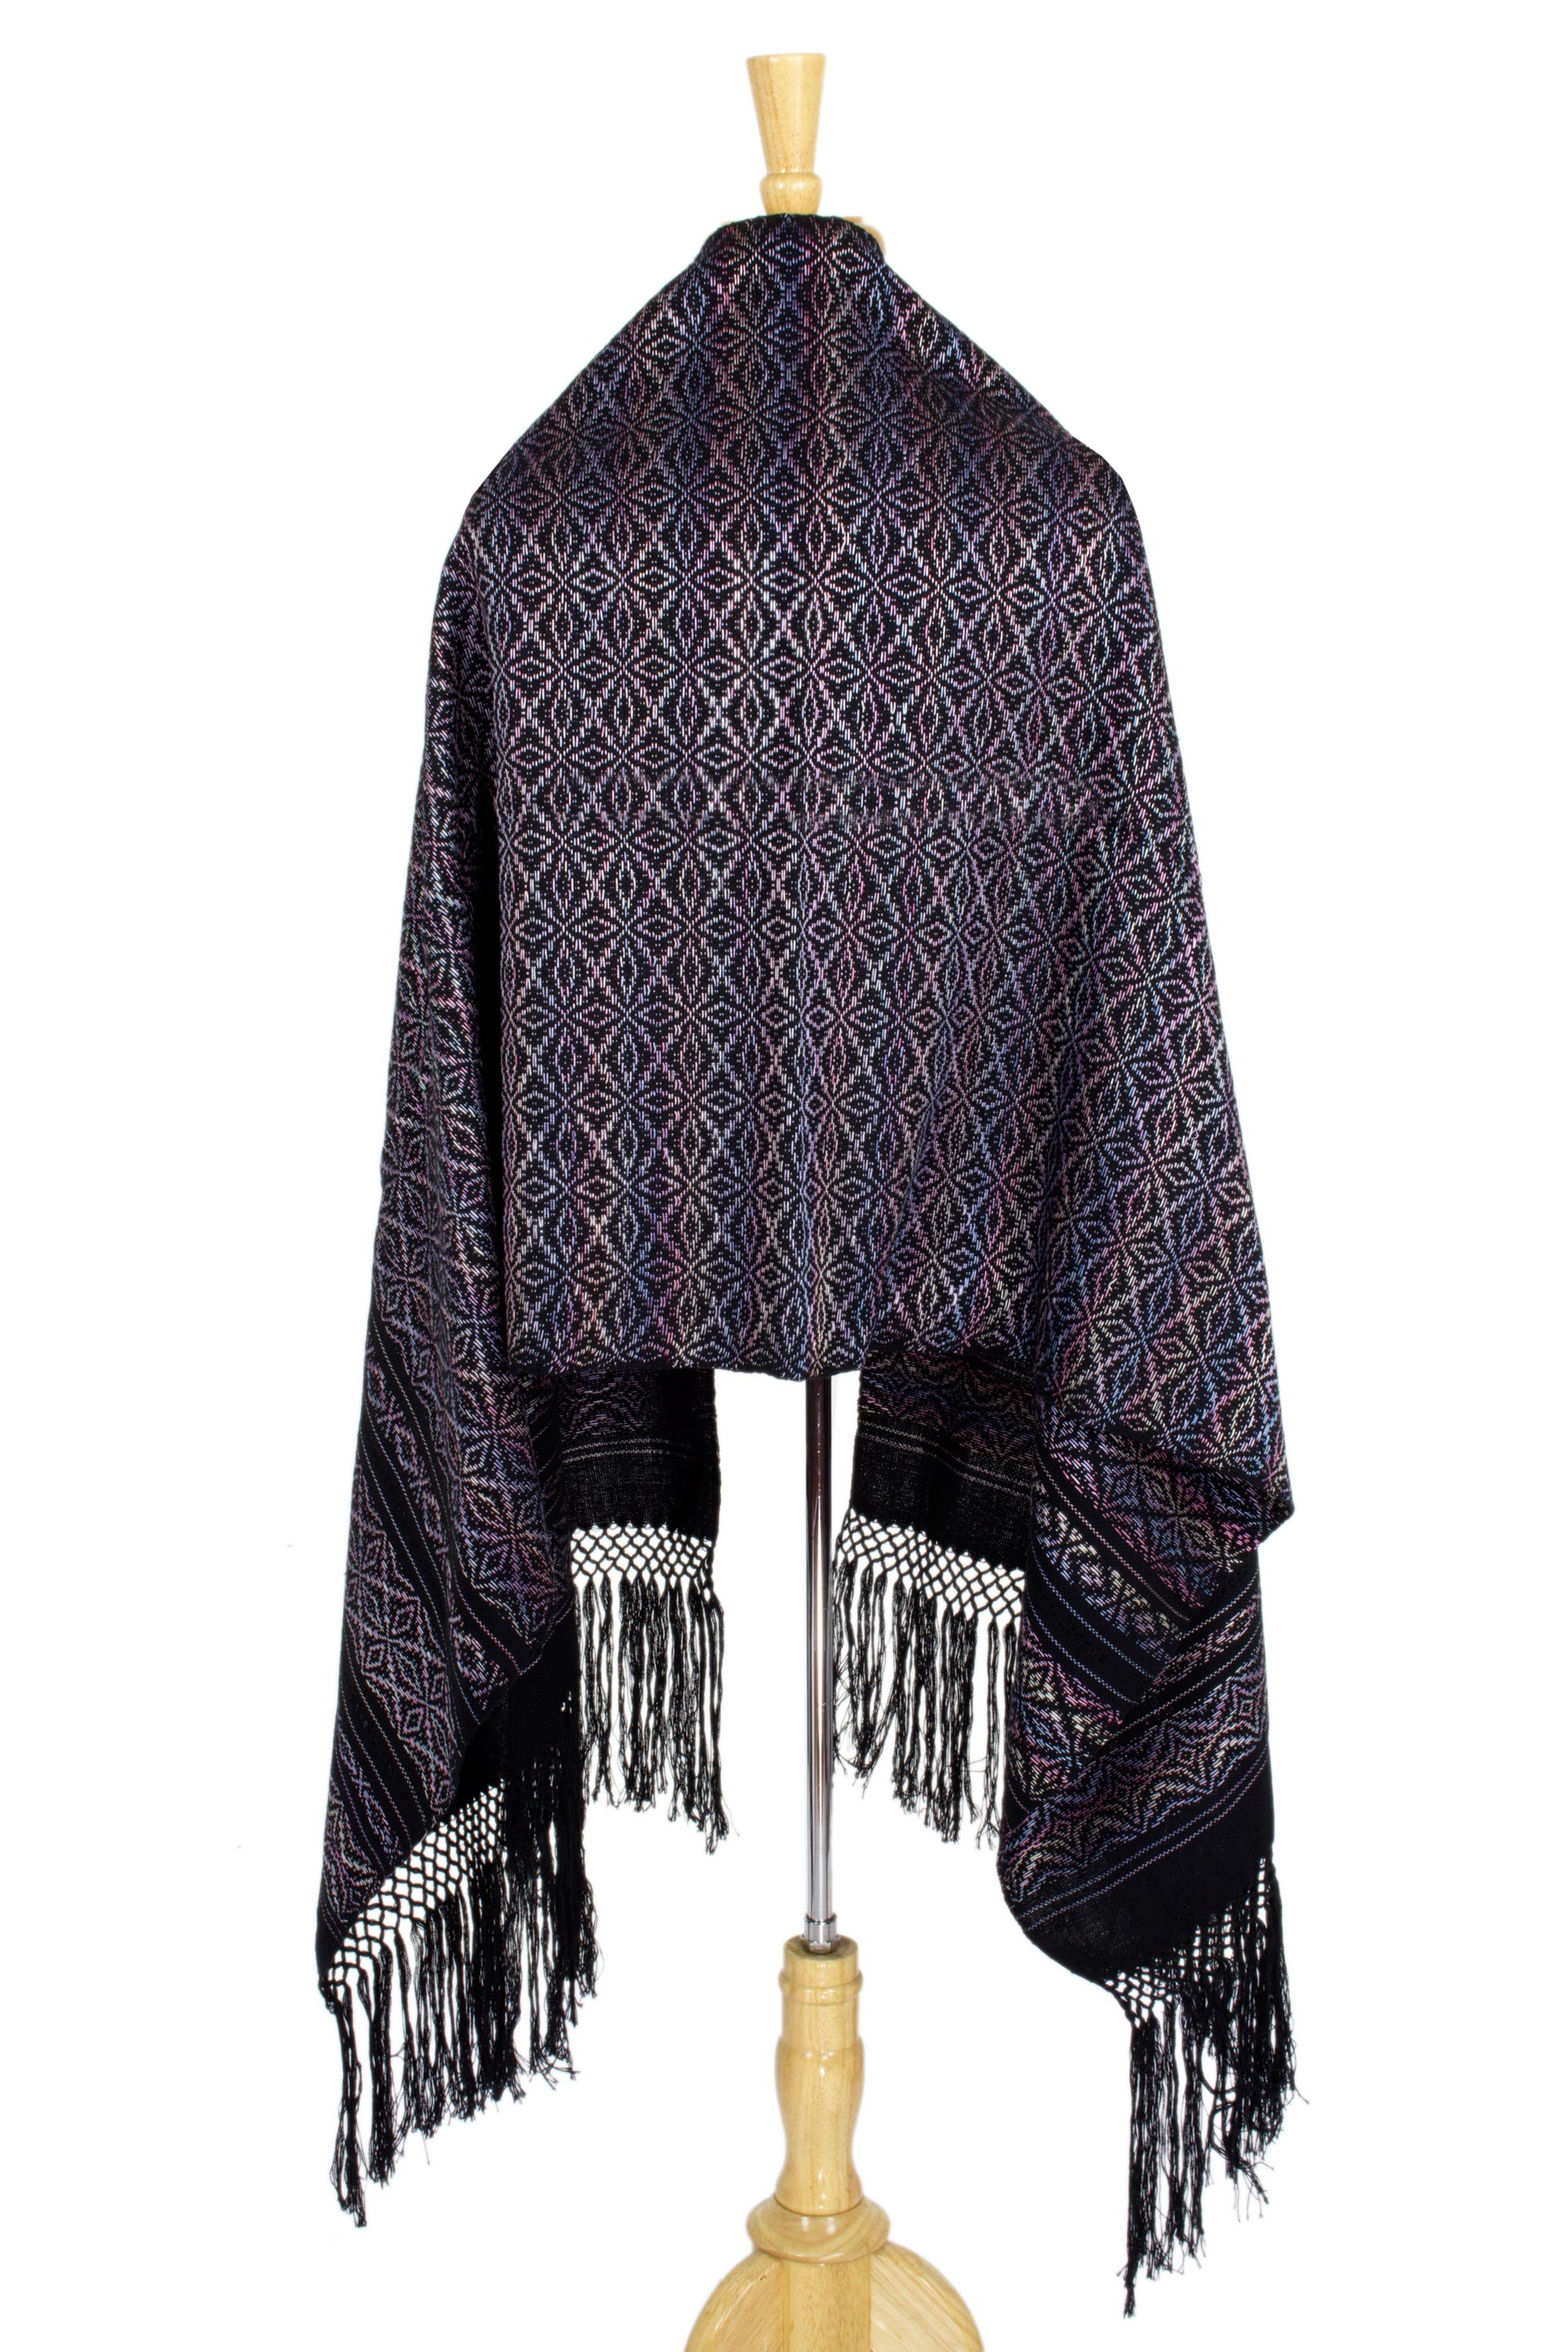 Cotton Rebozo Mexican Shawl with Multicolor Flowers on Black - Fiesta ...